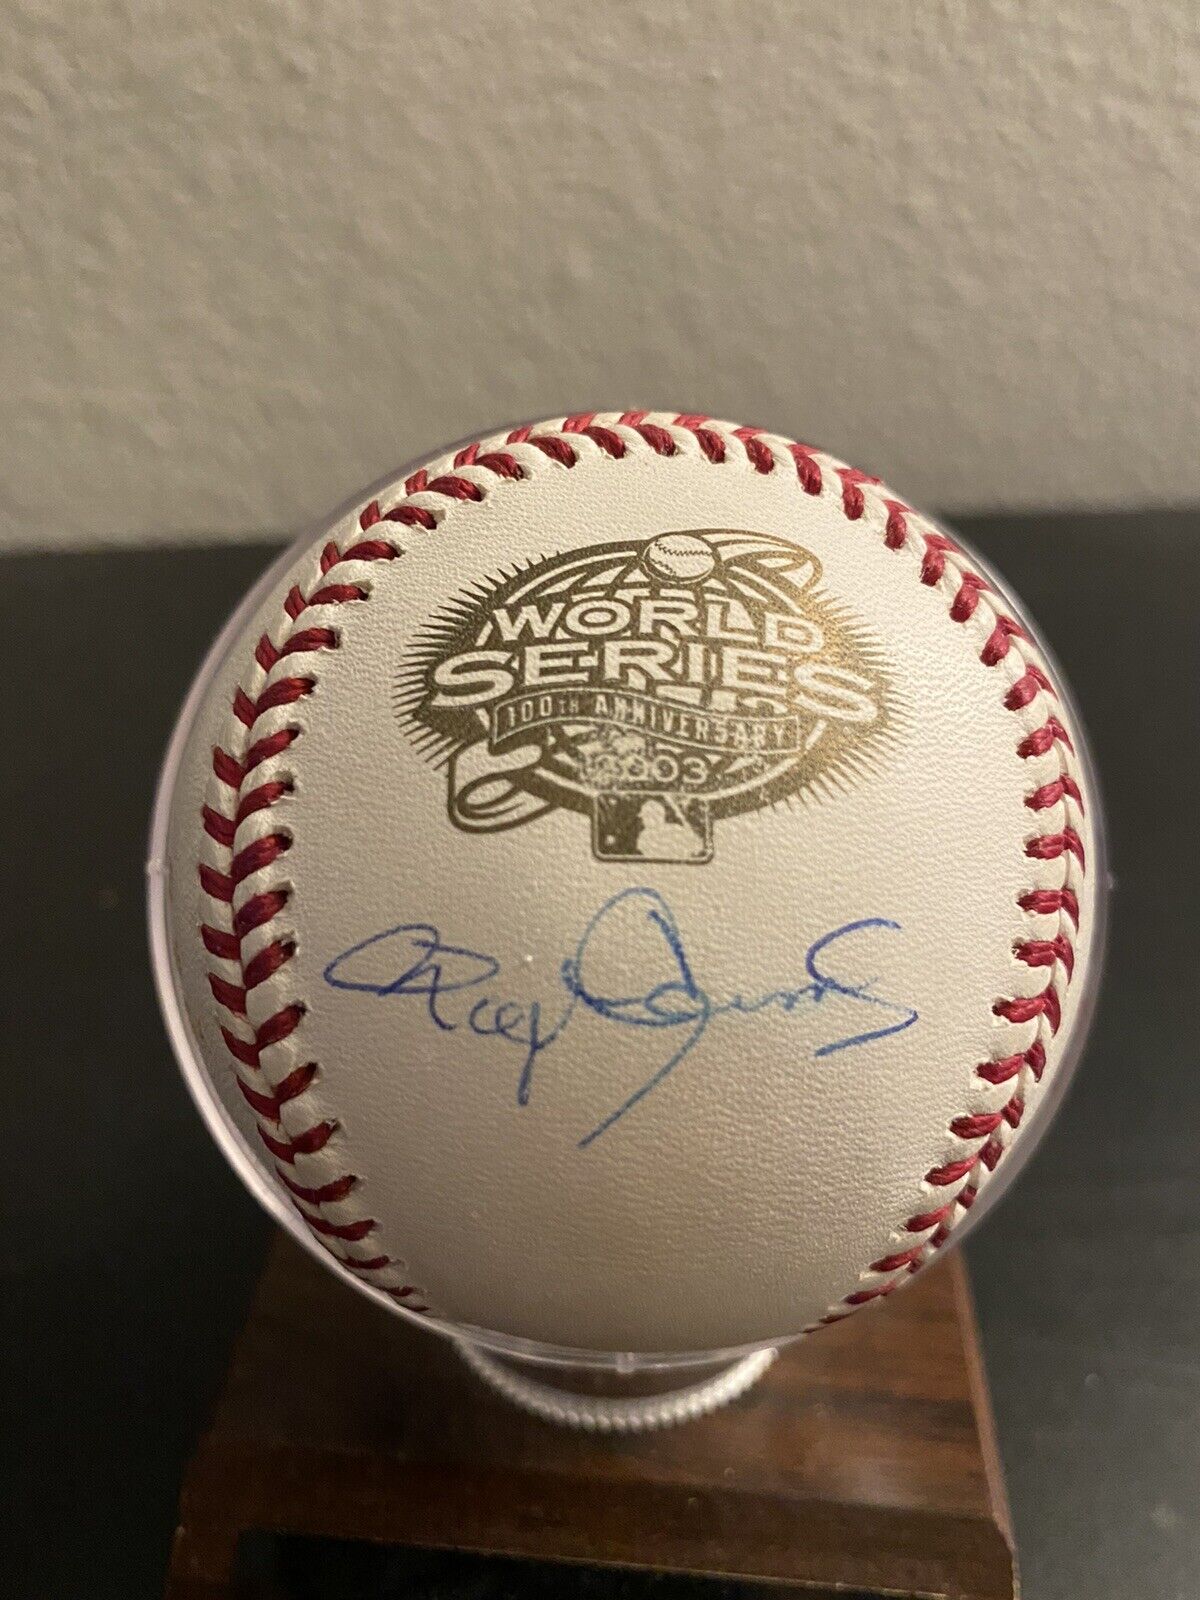 ROGER CLEMENS Signed Rawlings 2003 World Series Commemorative Official Baseball